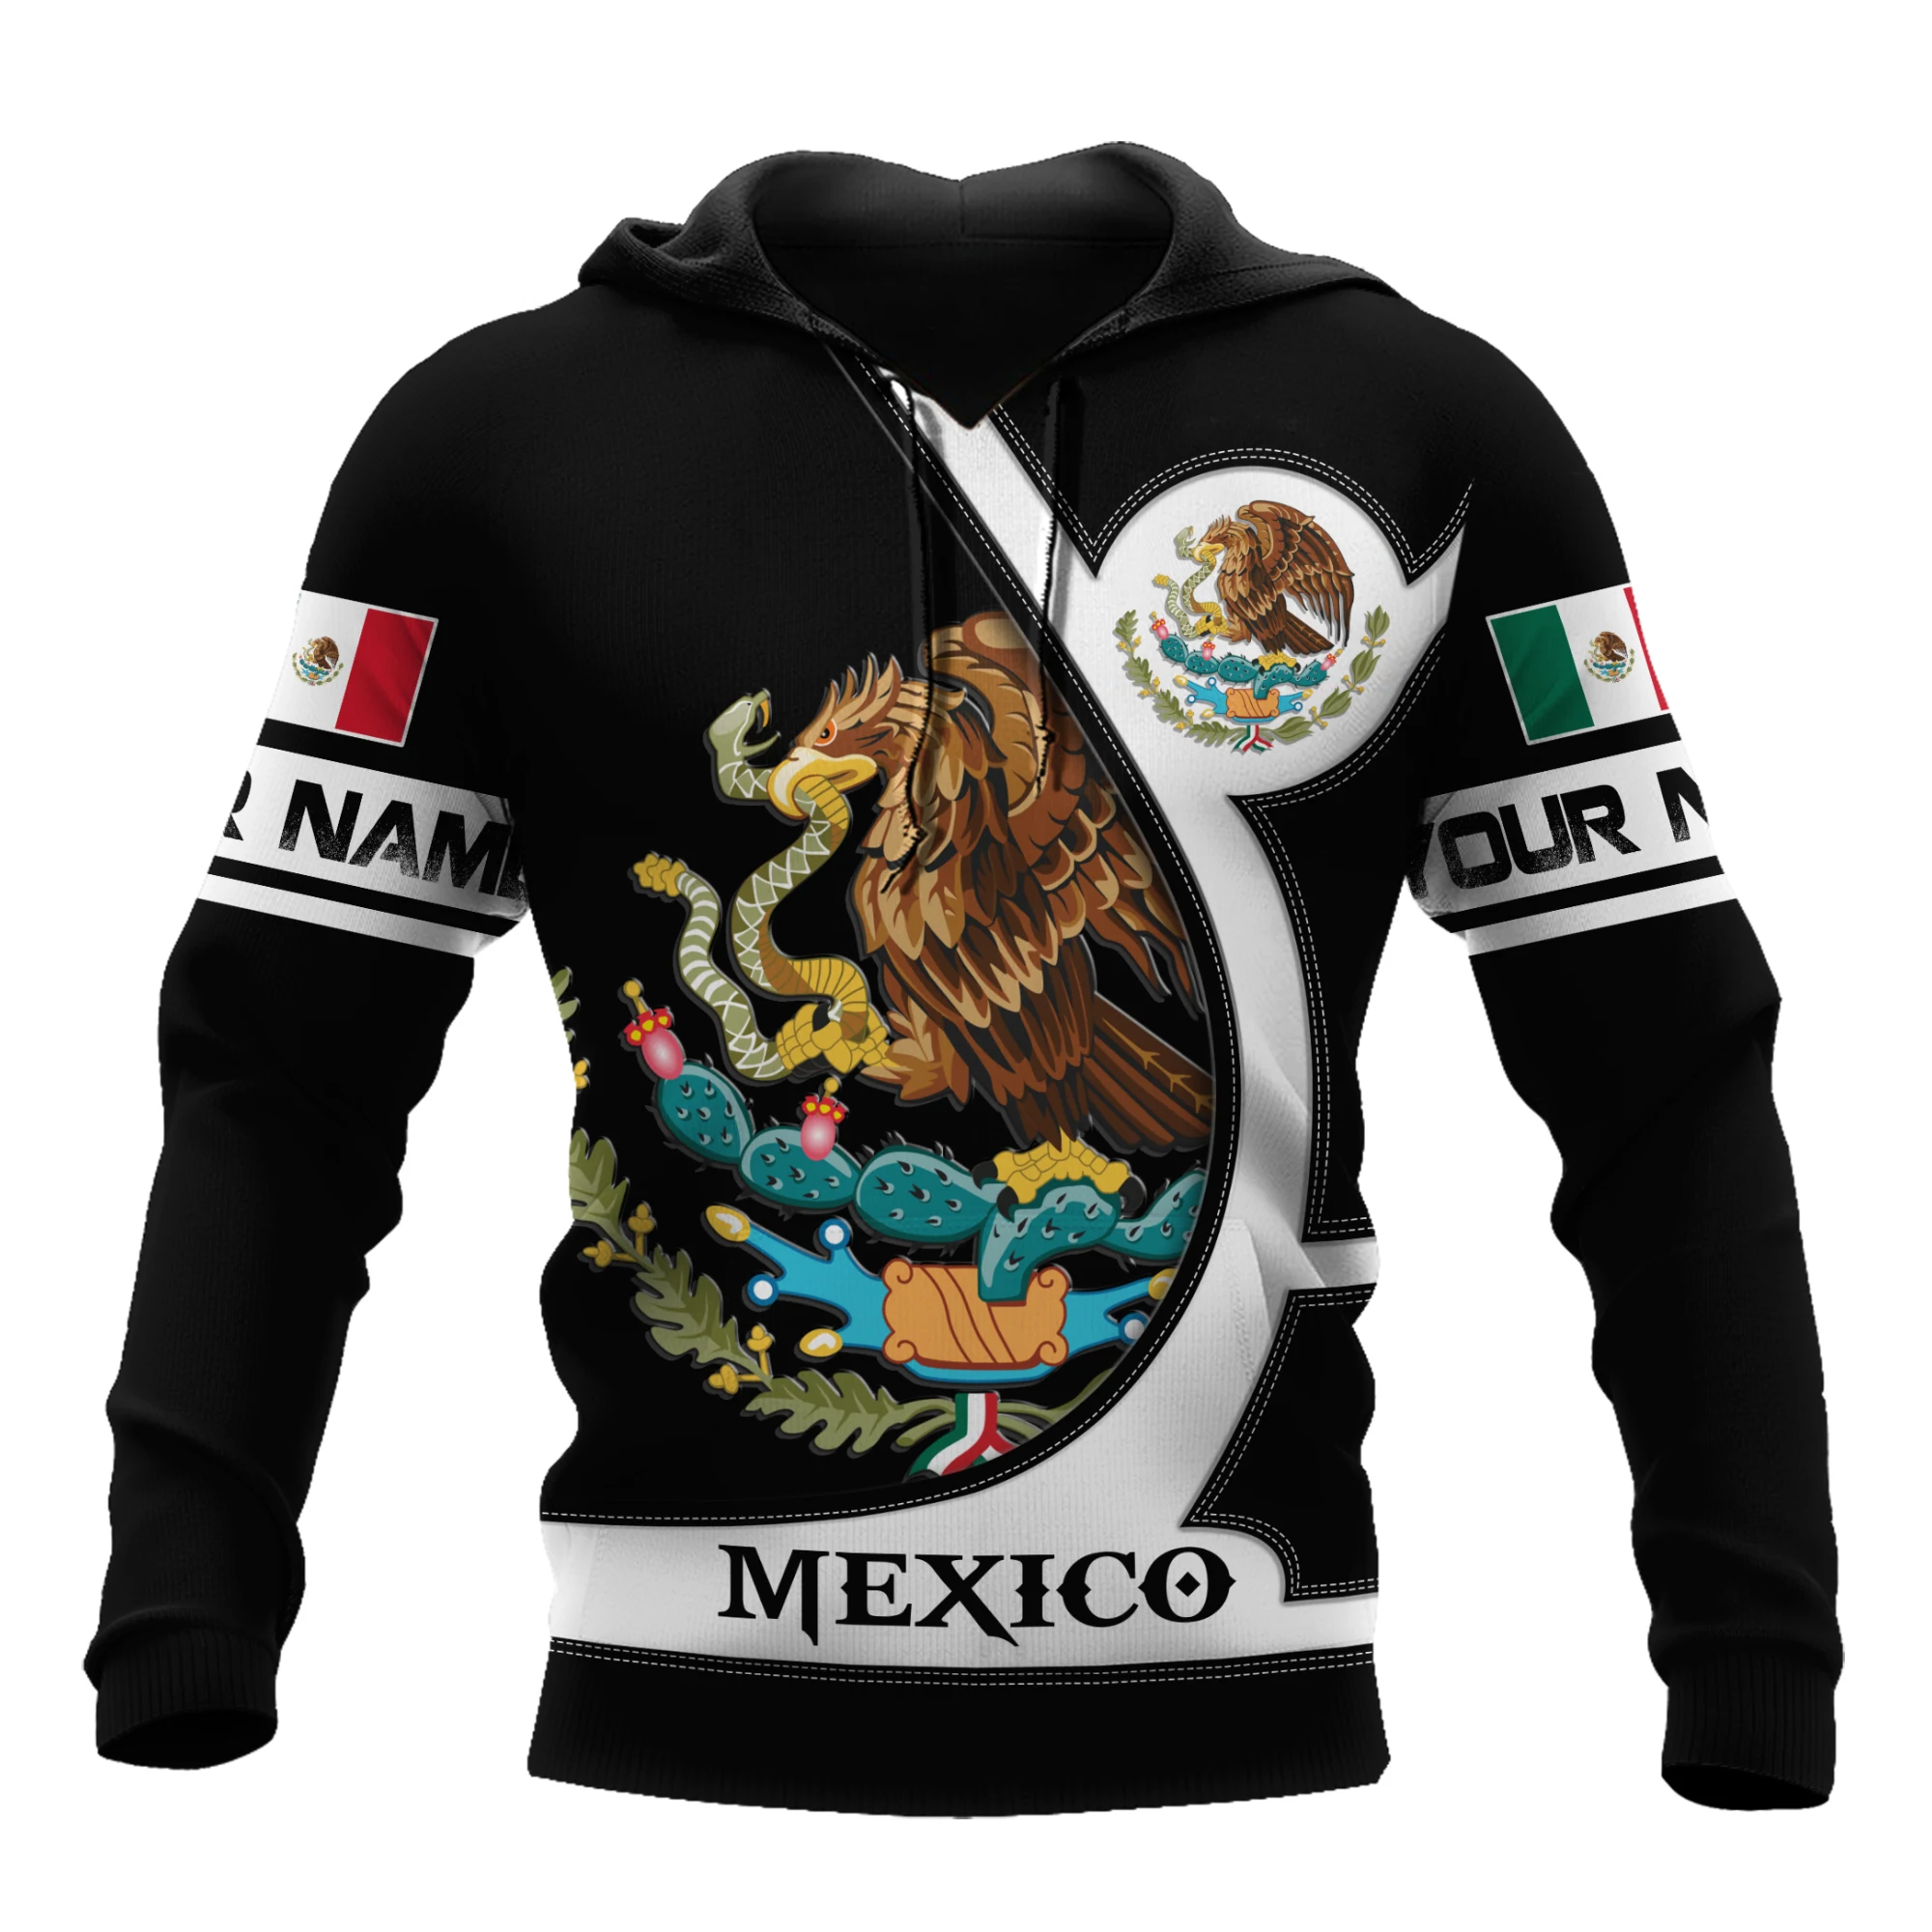 

Mexico National Flag Print Hoodies For Men Fashion 3D Eagle Pattern New in Sweatshirts Hip Hop Harajuku Oversized Pullover Tops